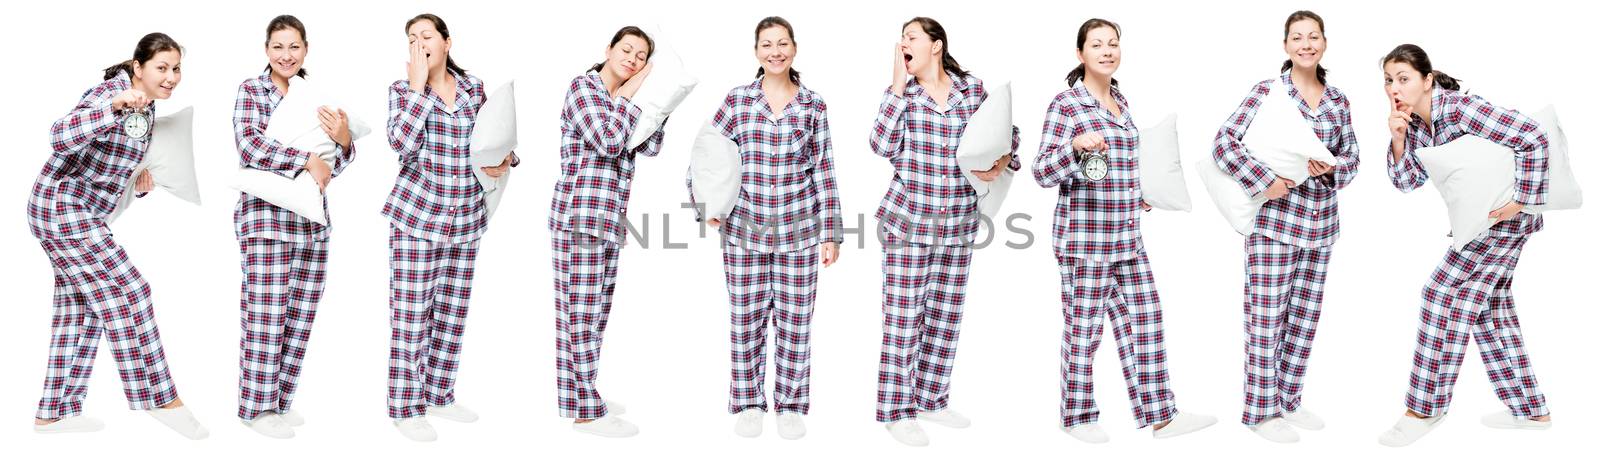 Girl with pillow posing on white background, 9 portraits in full length in a row